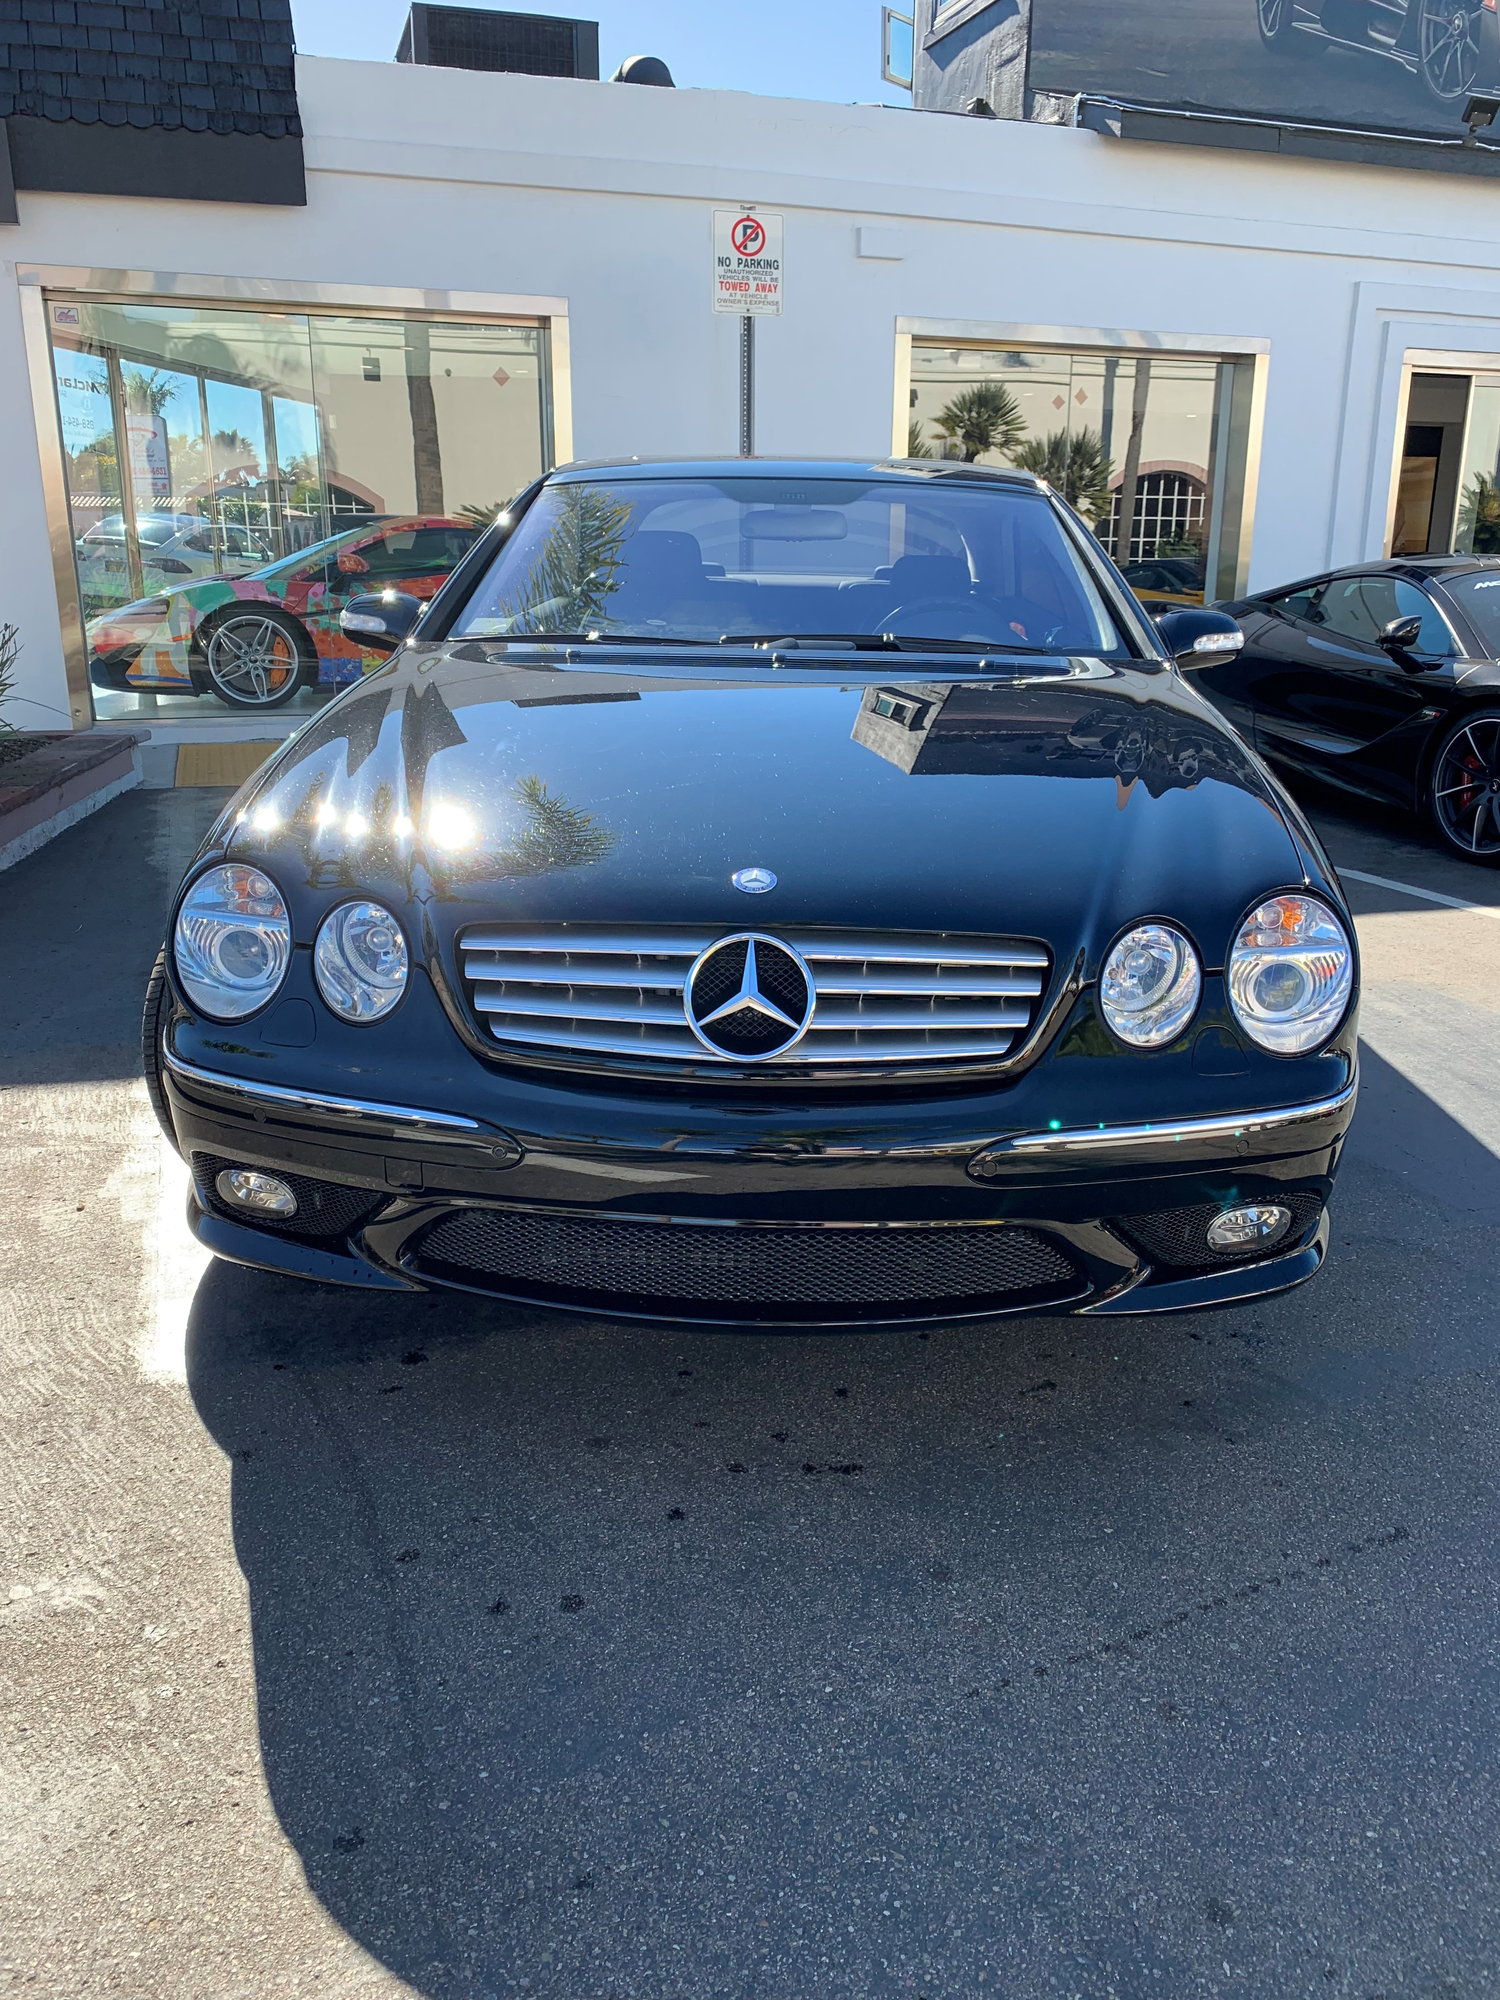 2005 Mercedes-Benz CL65 AMG - 2005 CL65 AMG- 17,000 miles- 1 owner - Used - VIN WDBPJ79JX5A044555 - 17,000 Miles - 12 cyl - 2WD - Automatic - Coupe - Black - San Diego, CA 92037, United States